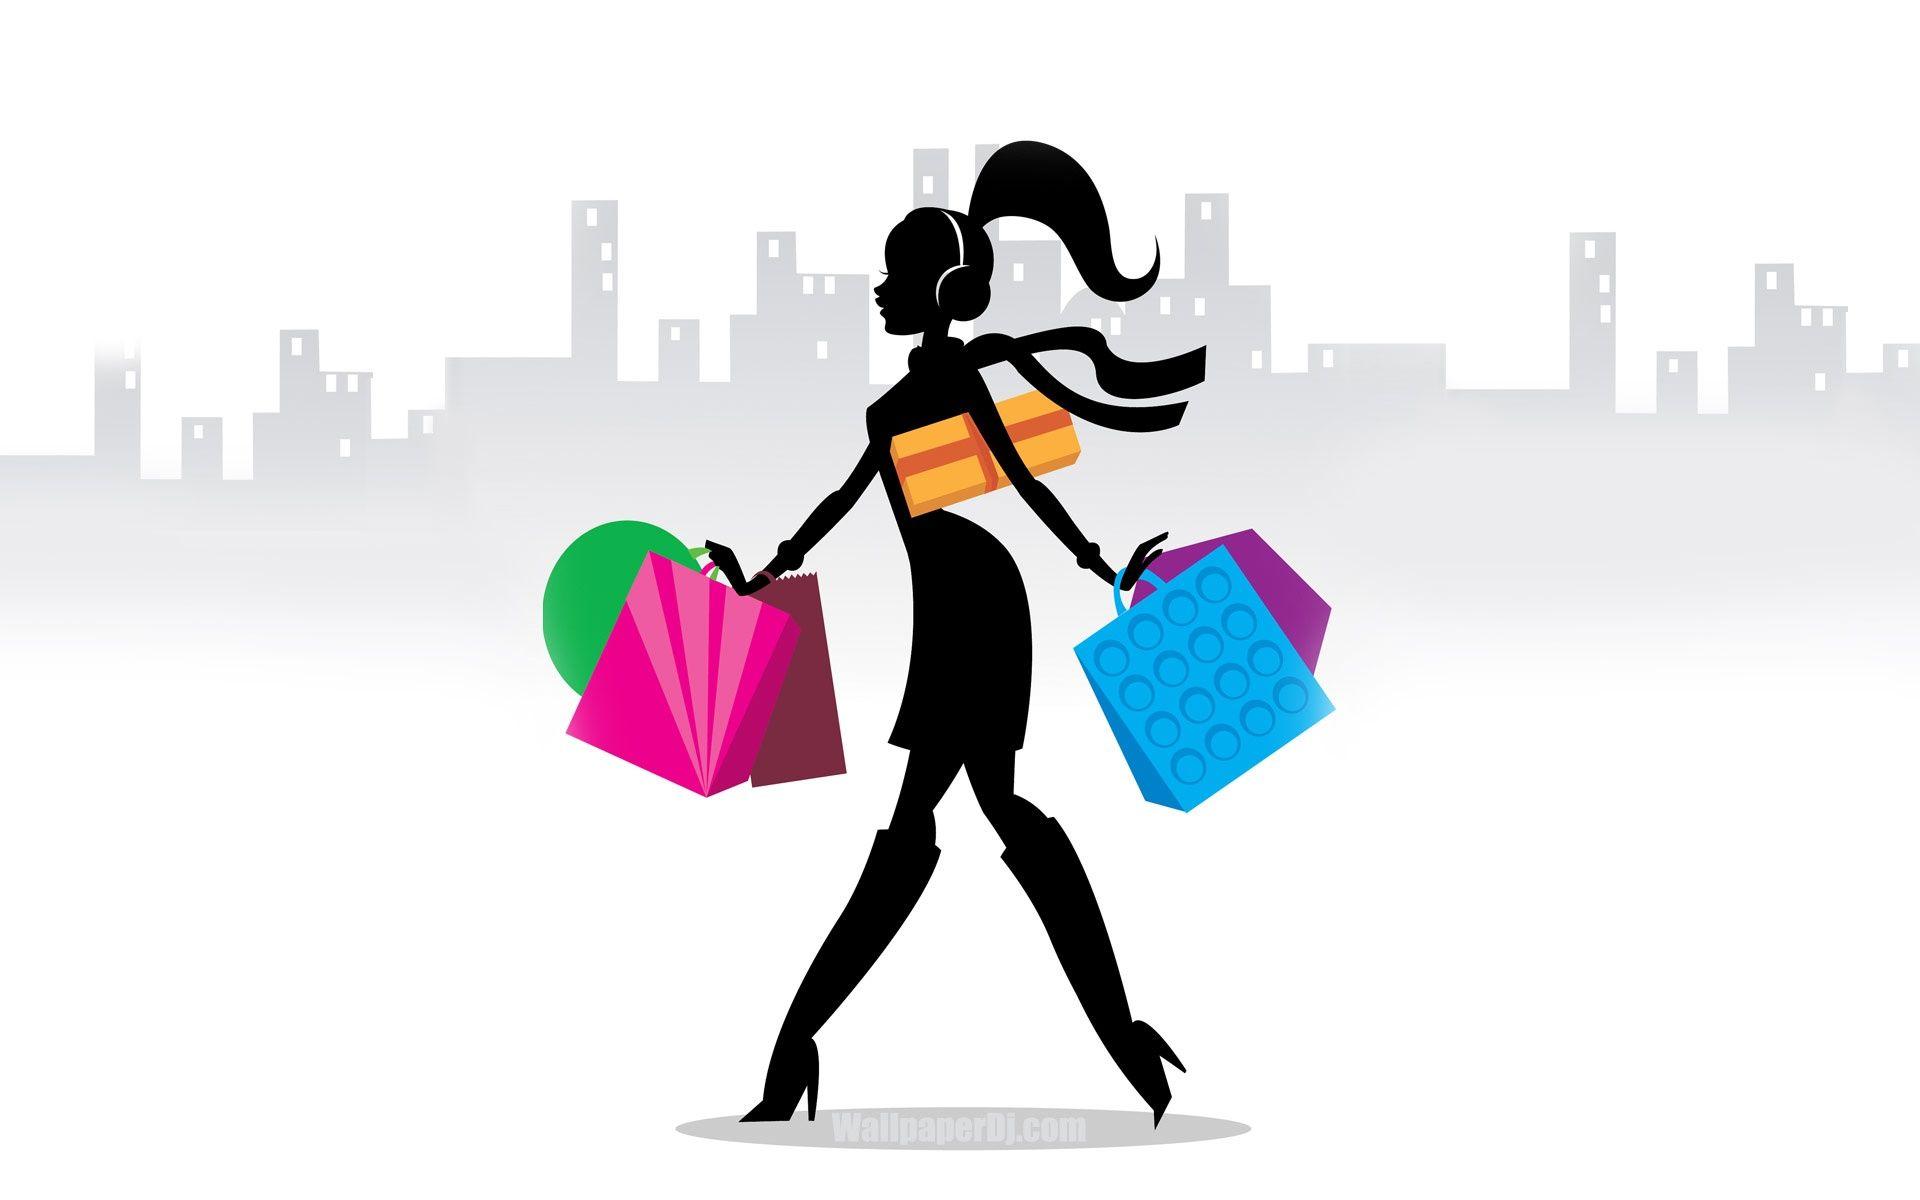 Mobile Compatible Shopping HD Wallpaper, Shopping HD Free Background